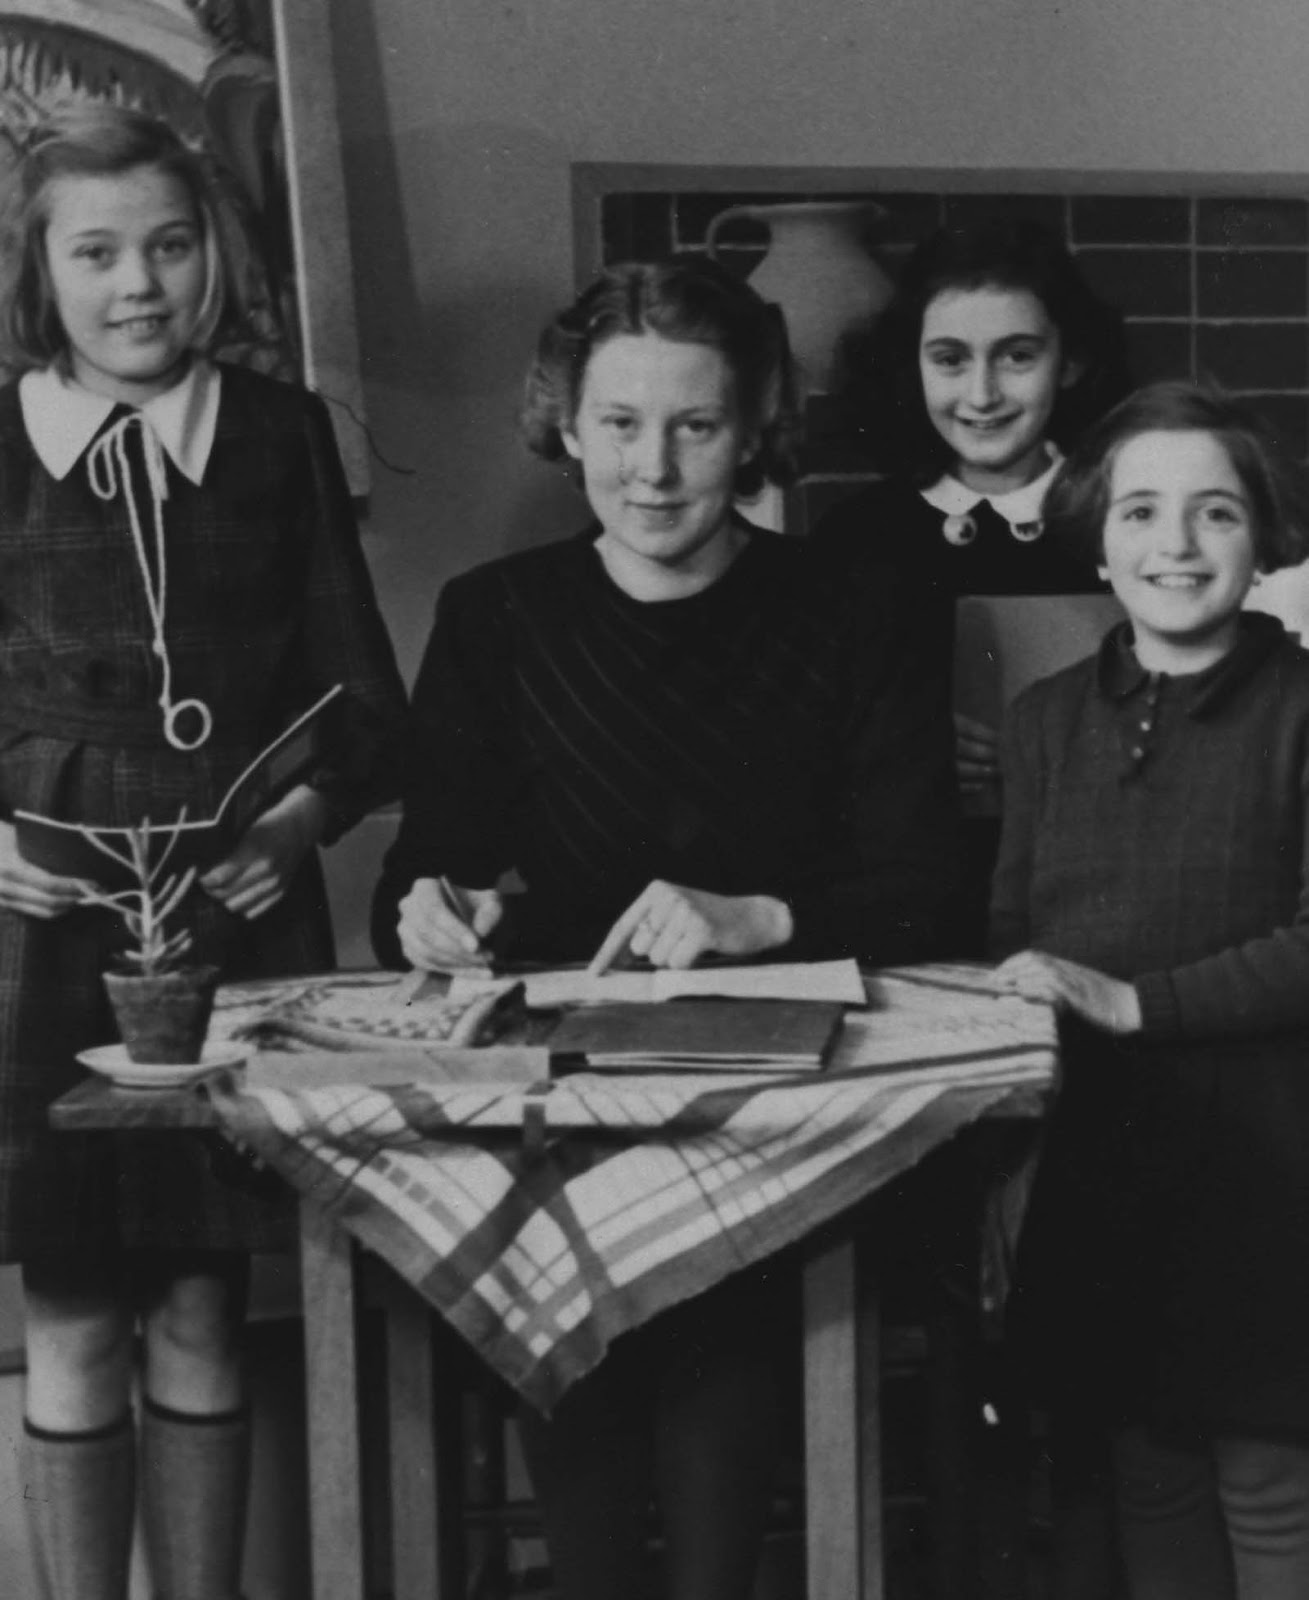 Anne Frank at the Montessori school in 1940. She is 11 years old.